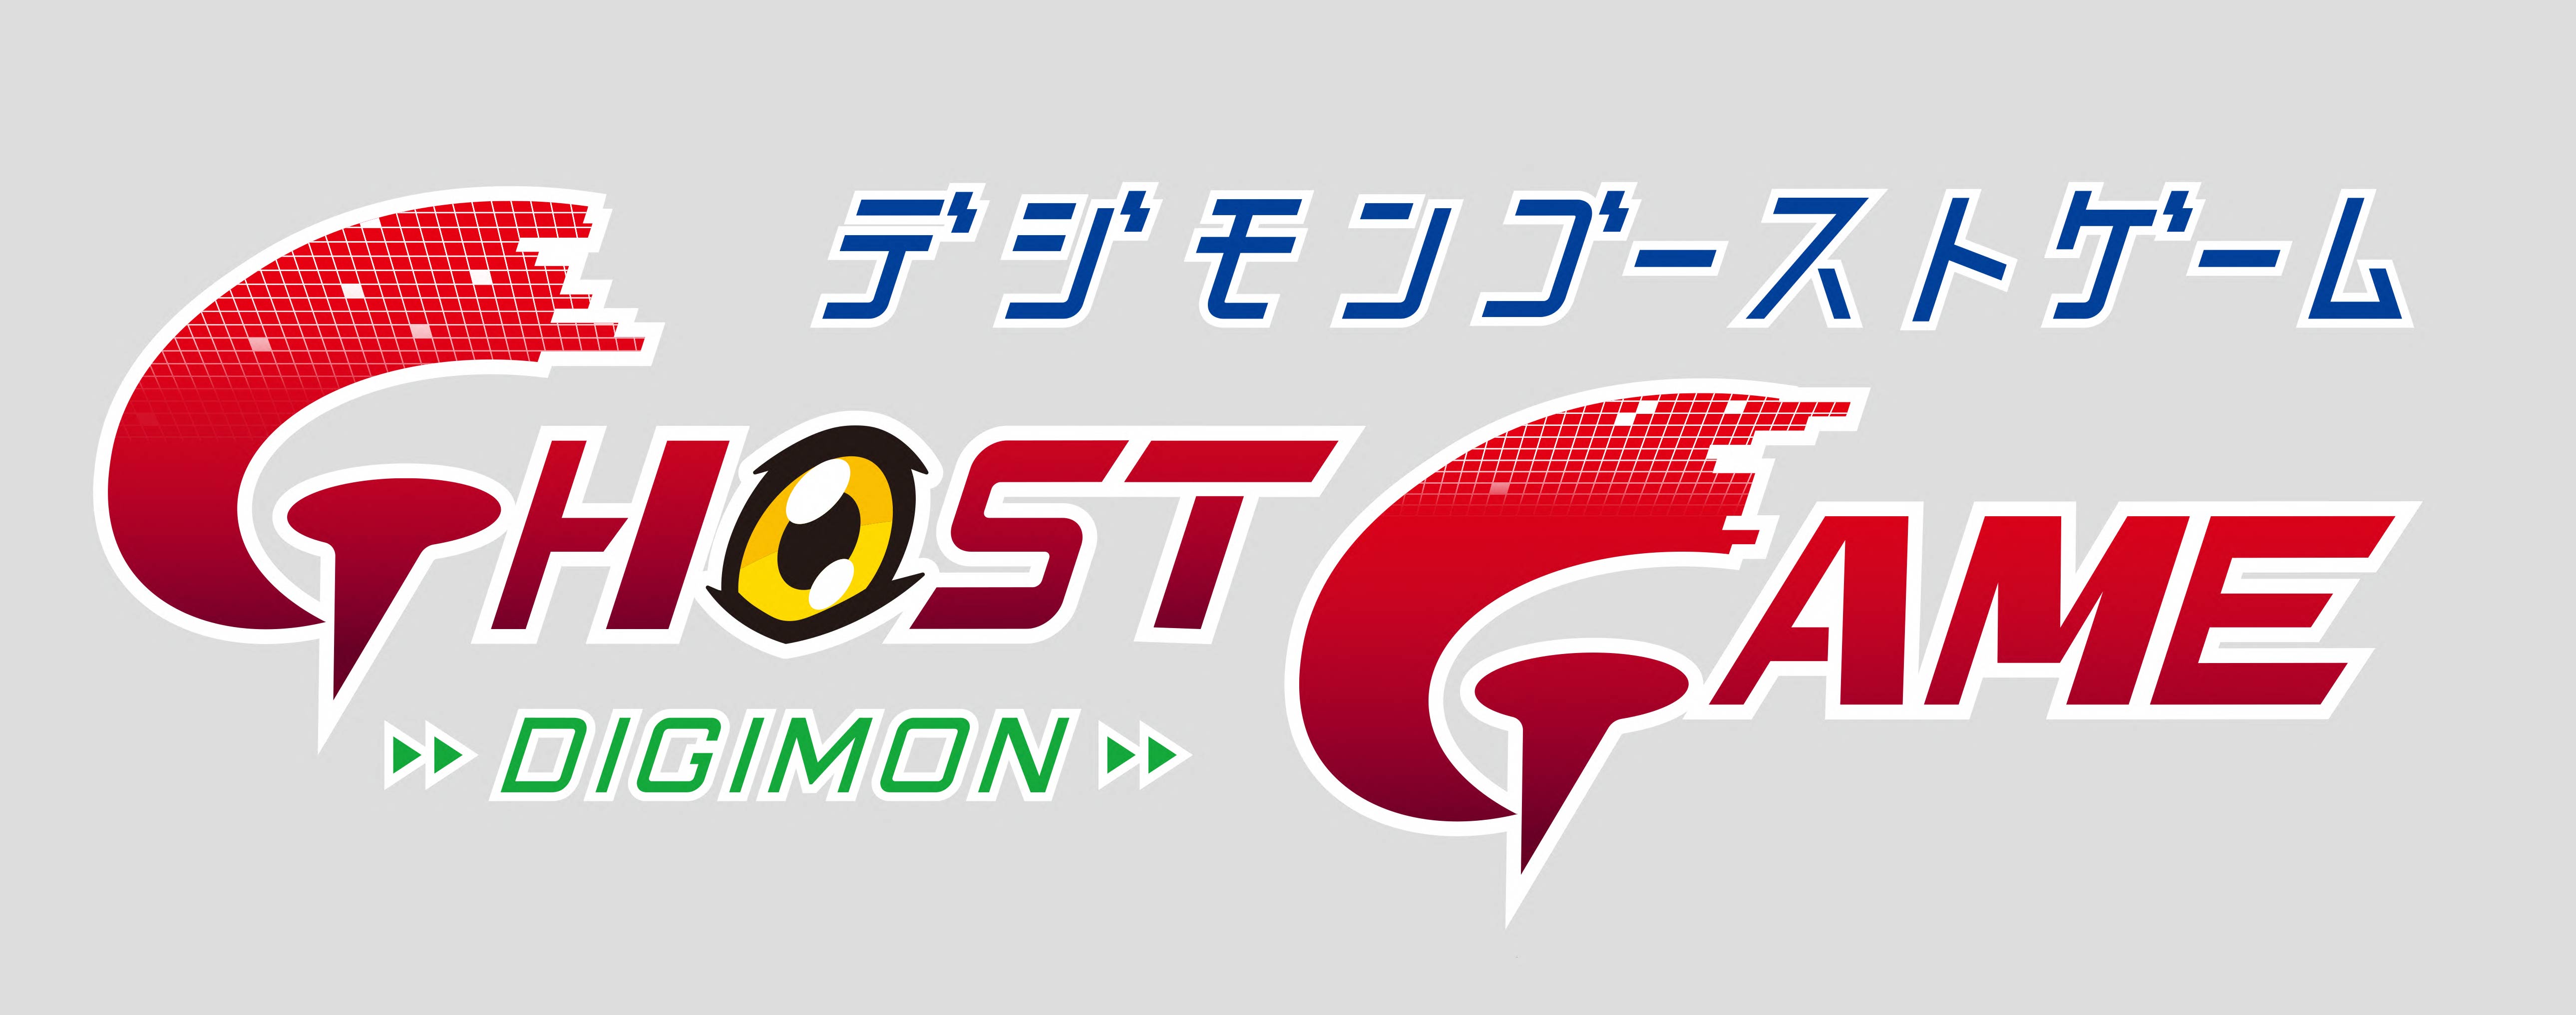 Digimon Ghost Game Anime Green-Lit, Digimon New Film Announced